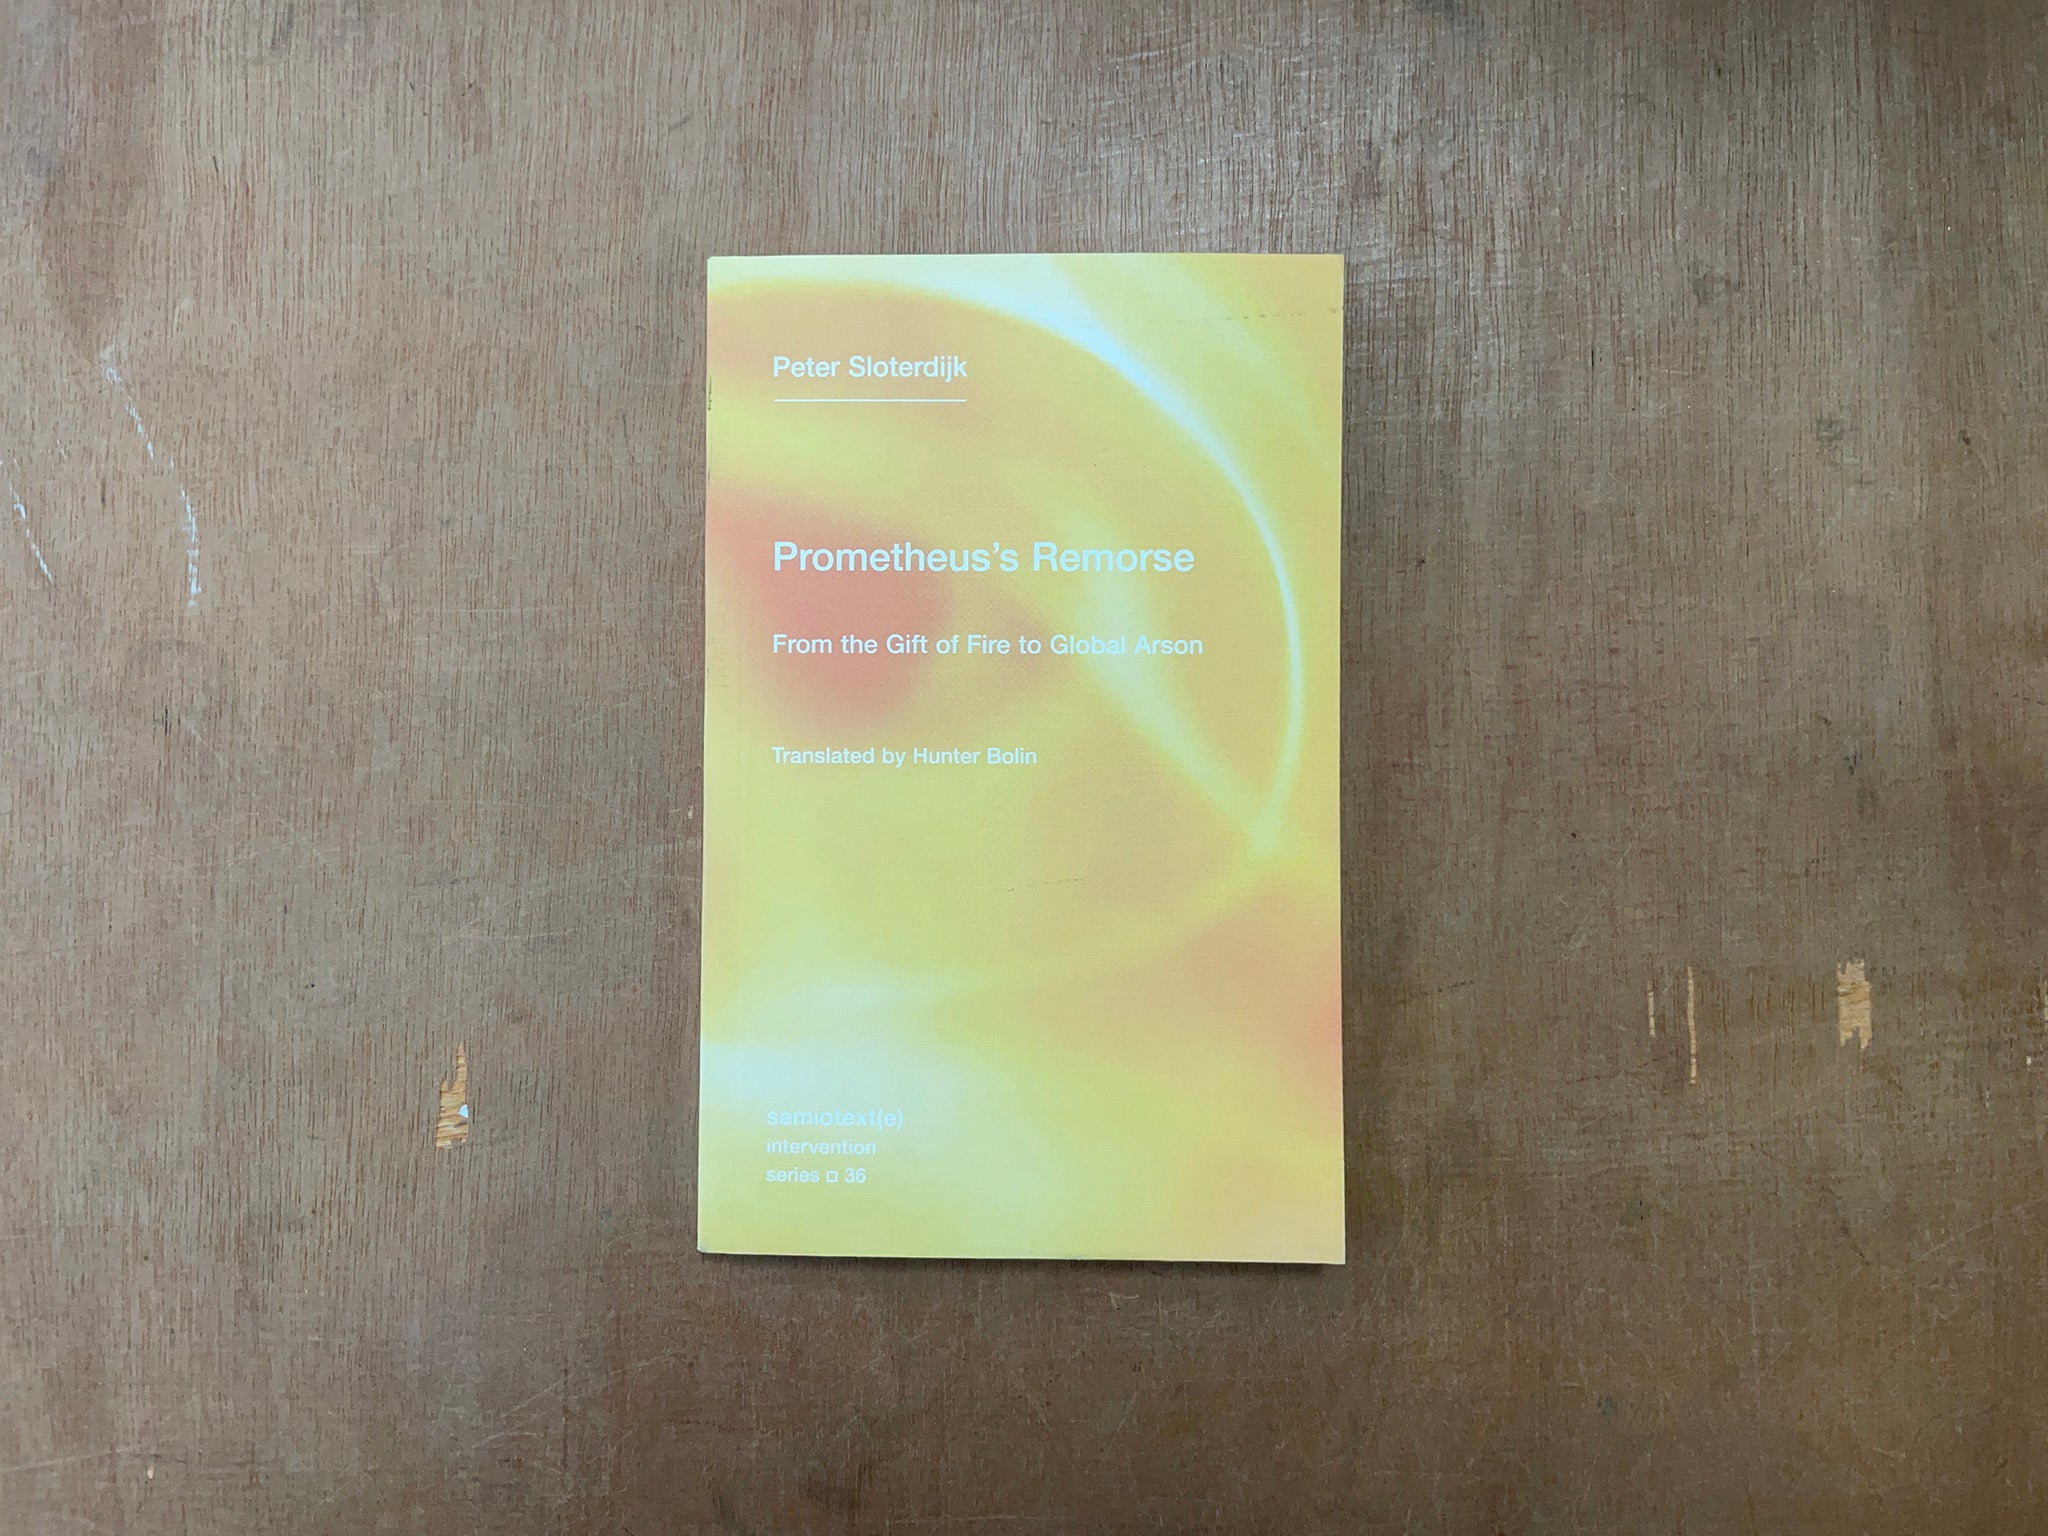 PROMETHEUS'S REMORSE: FROM THE GIFT OF FIRE TO GLOBAL ARSON by Peter Sloterdijk